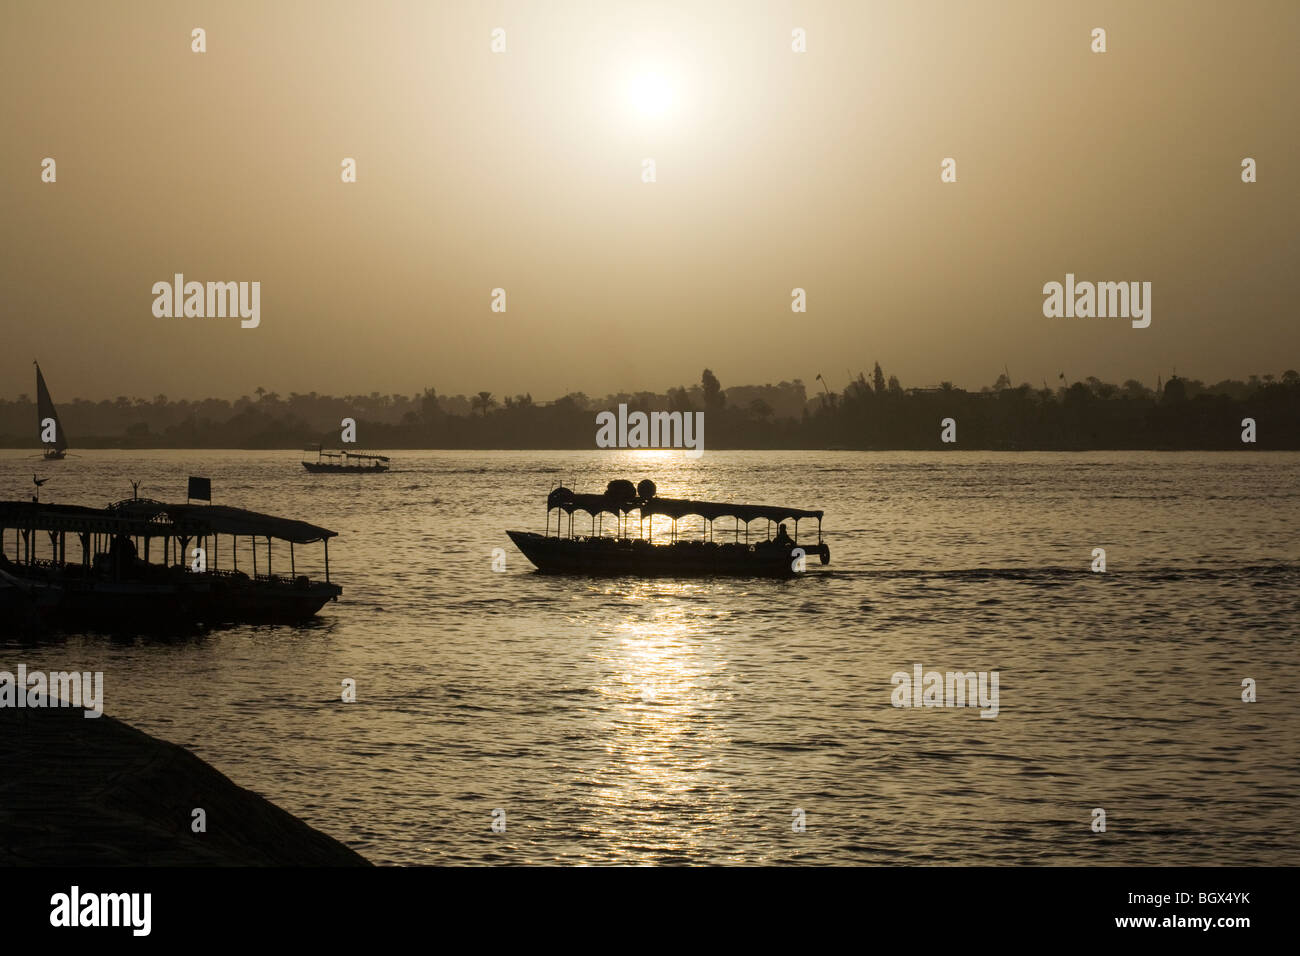 Motor launches on the River Nile at sunset, Luxor, Egypt, North Africa Stock Photo